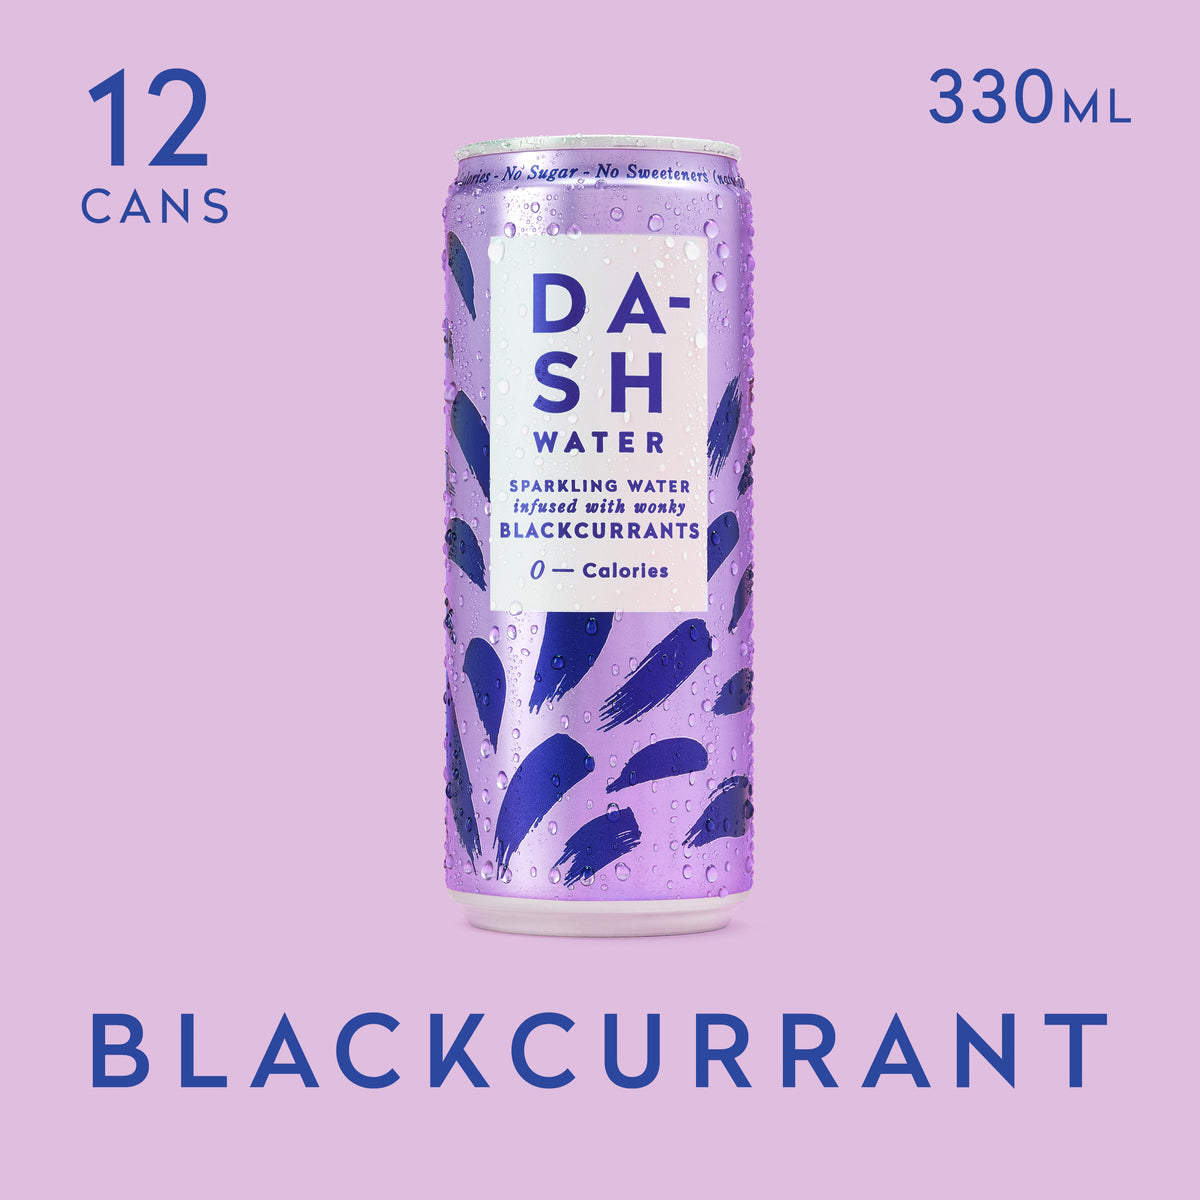 BLACKCURRANT (CASE OF 12)